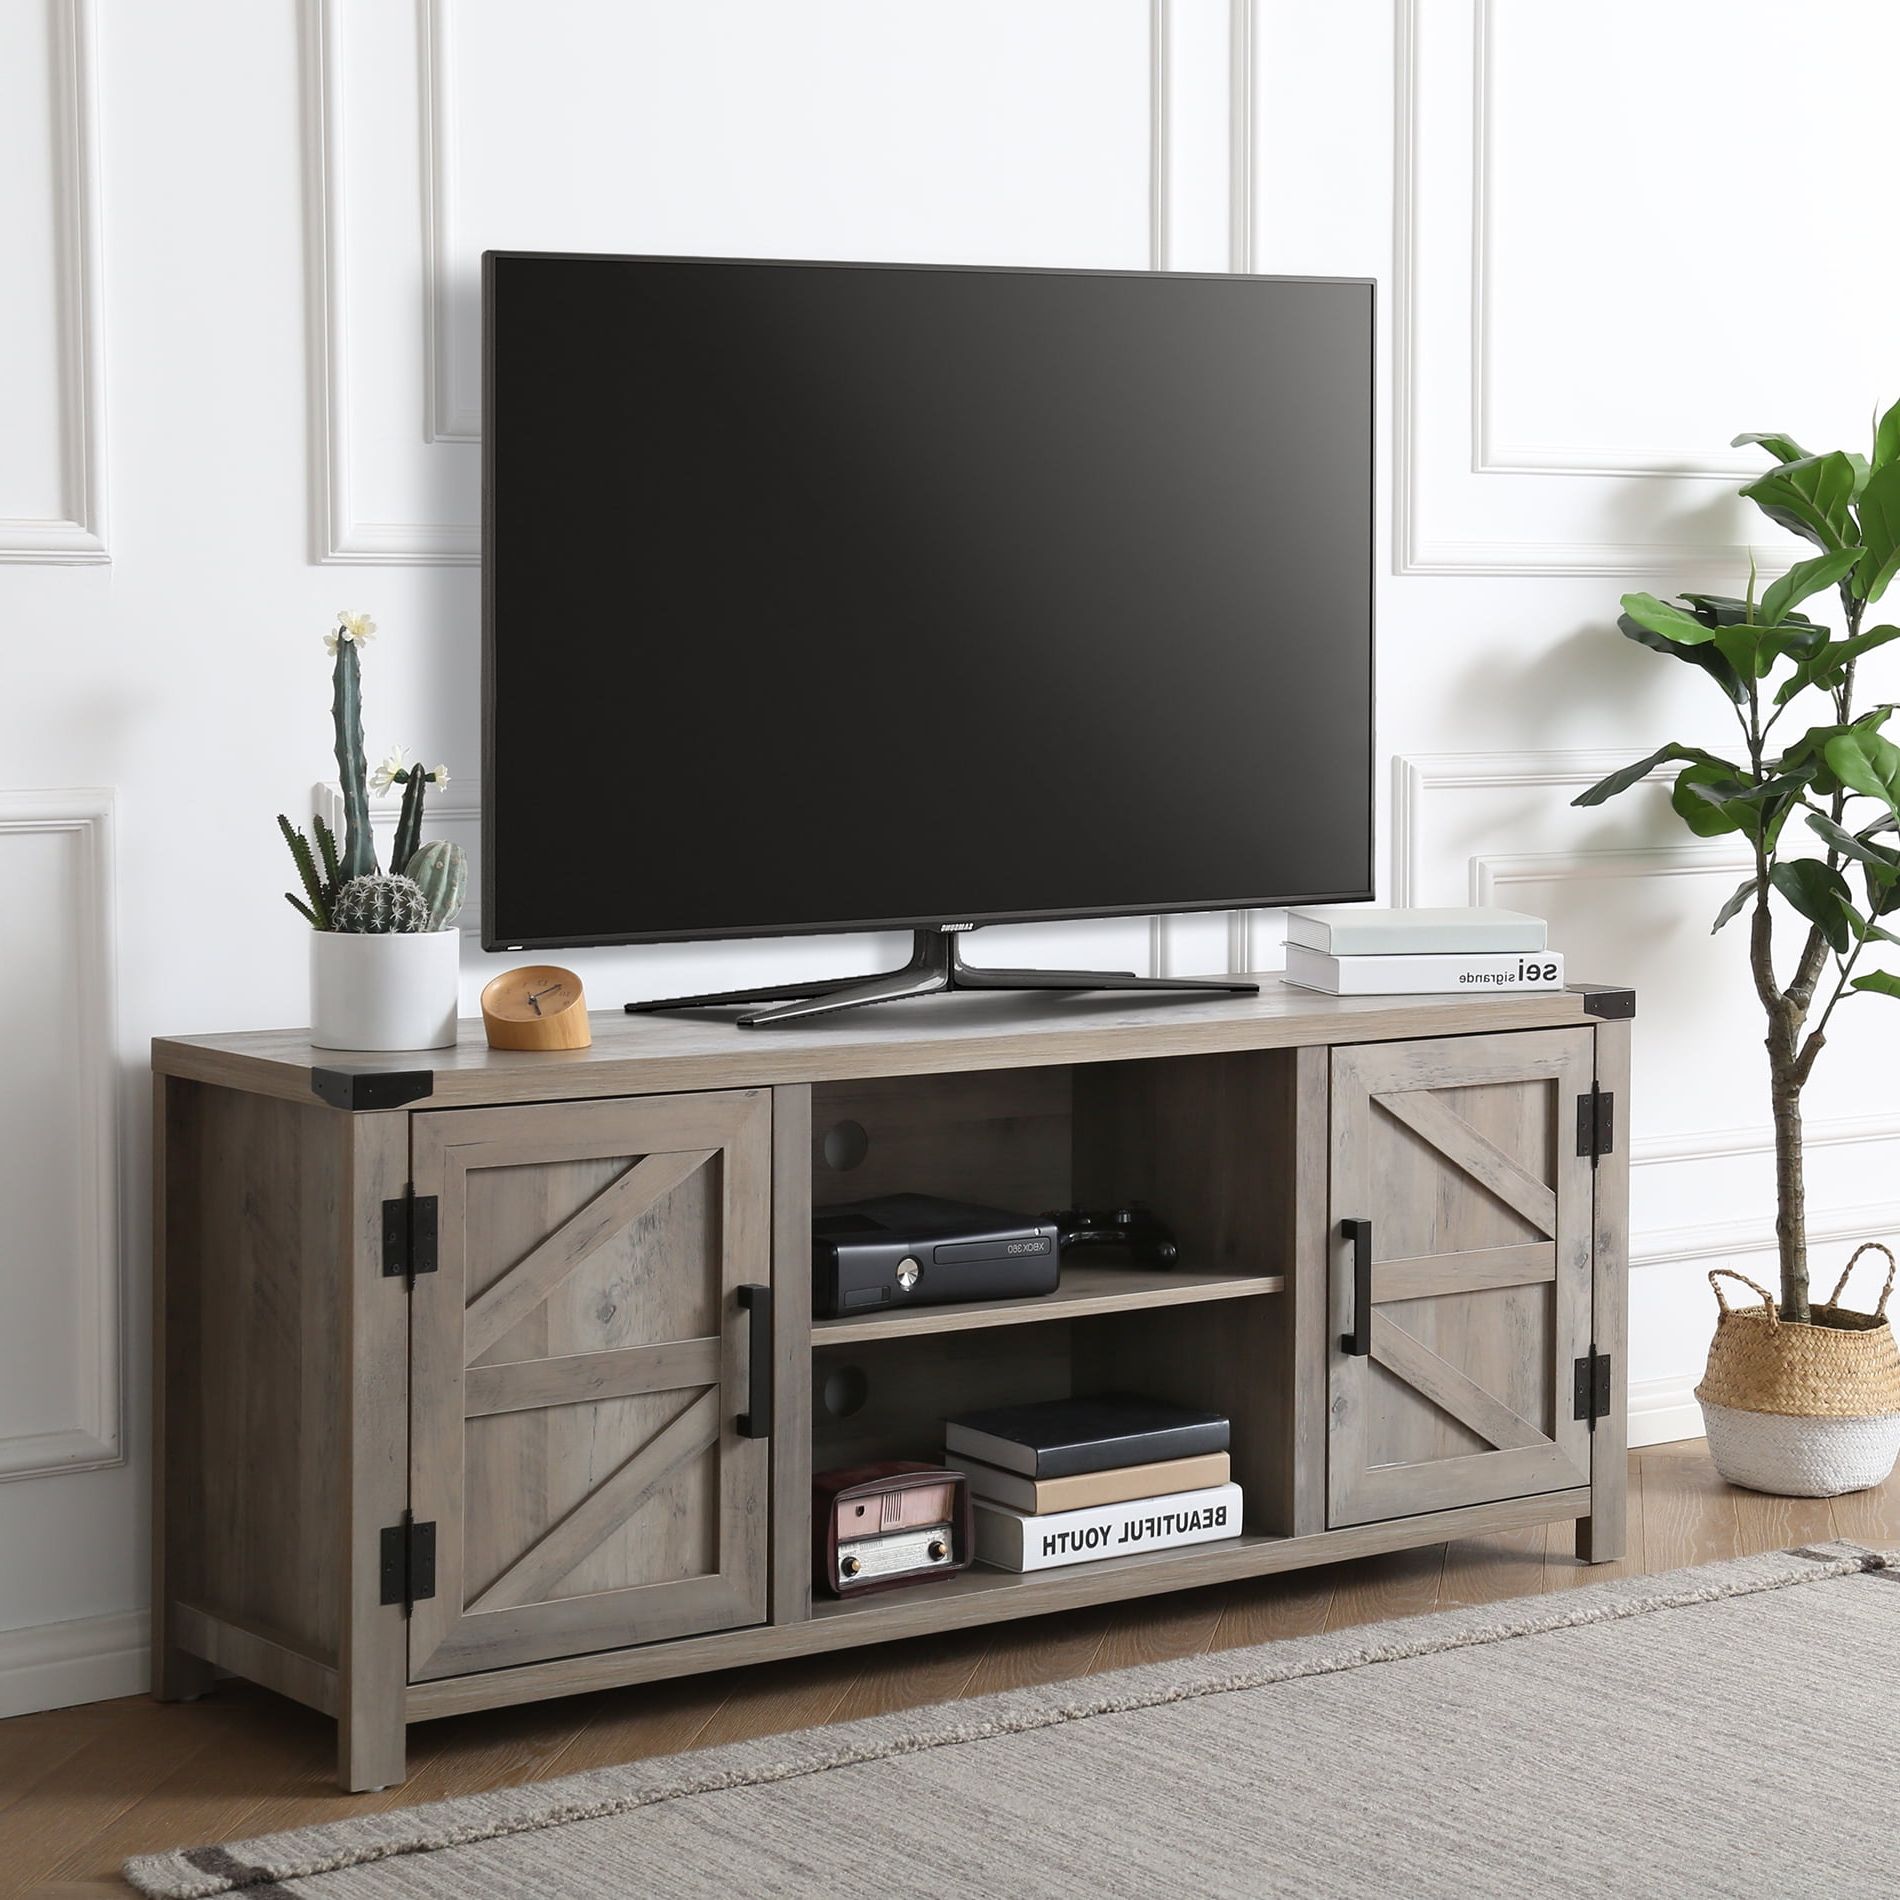 Well Known Fitueyes Farmhouse Barn Door Wood Tv Stands For 70'' Flat Screen, Media Throughout Farmhouse Media Entertainment Centers (View 14 of 15)